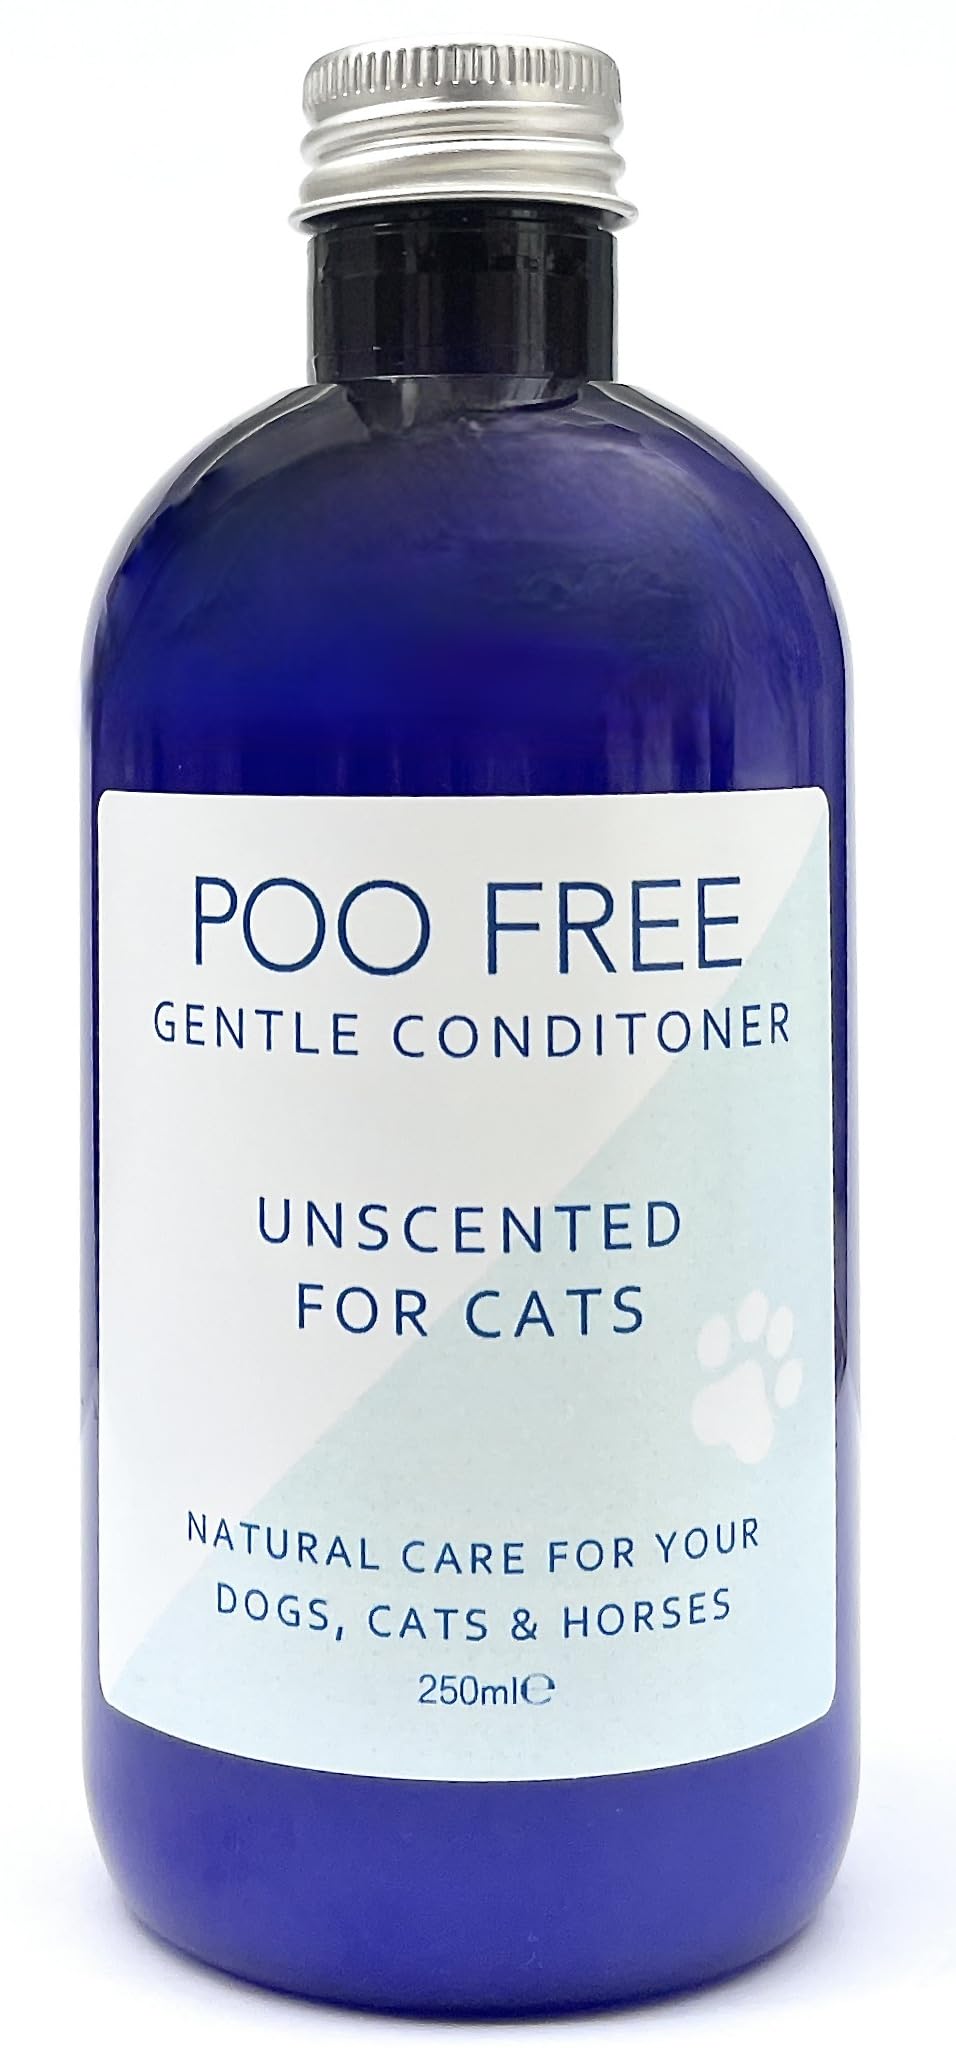 99% Natural CONDITIONER FOR CATS - ODORLESS FOR SENSITIVE CATS - 250ml POO FREE No sulfate, parabens. Concentrated, Soothes, Hydrates, Relieves Itching. pH value for cats Balanced. - PawsPlanet Australia